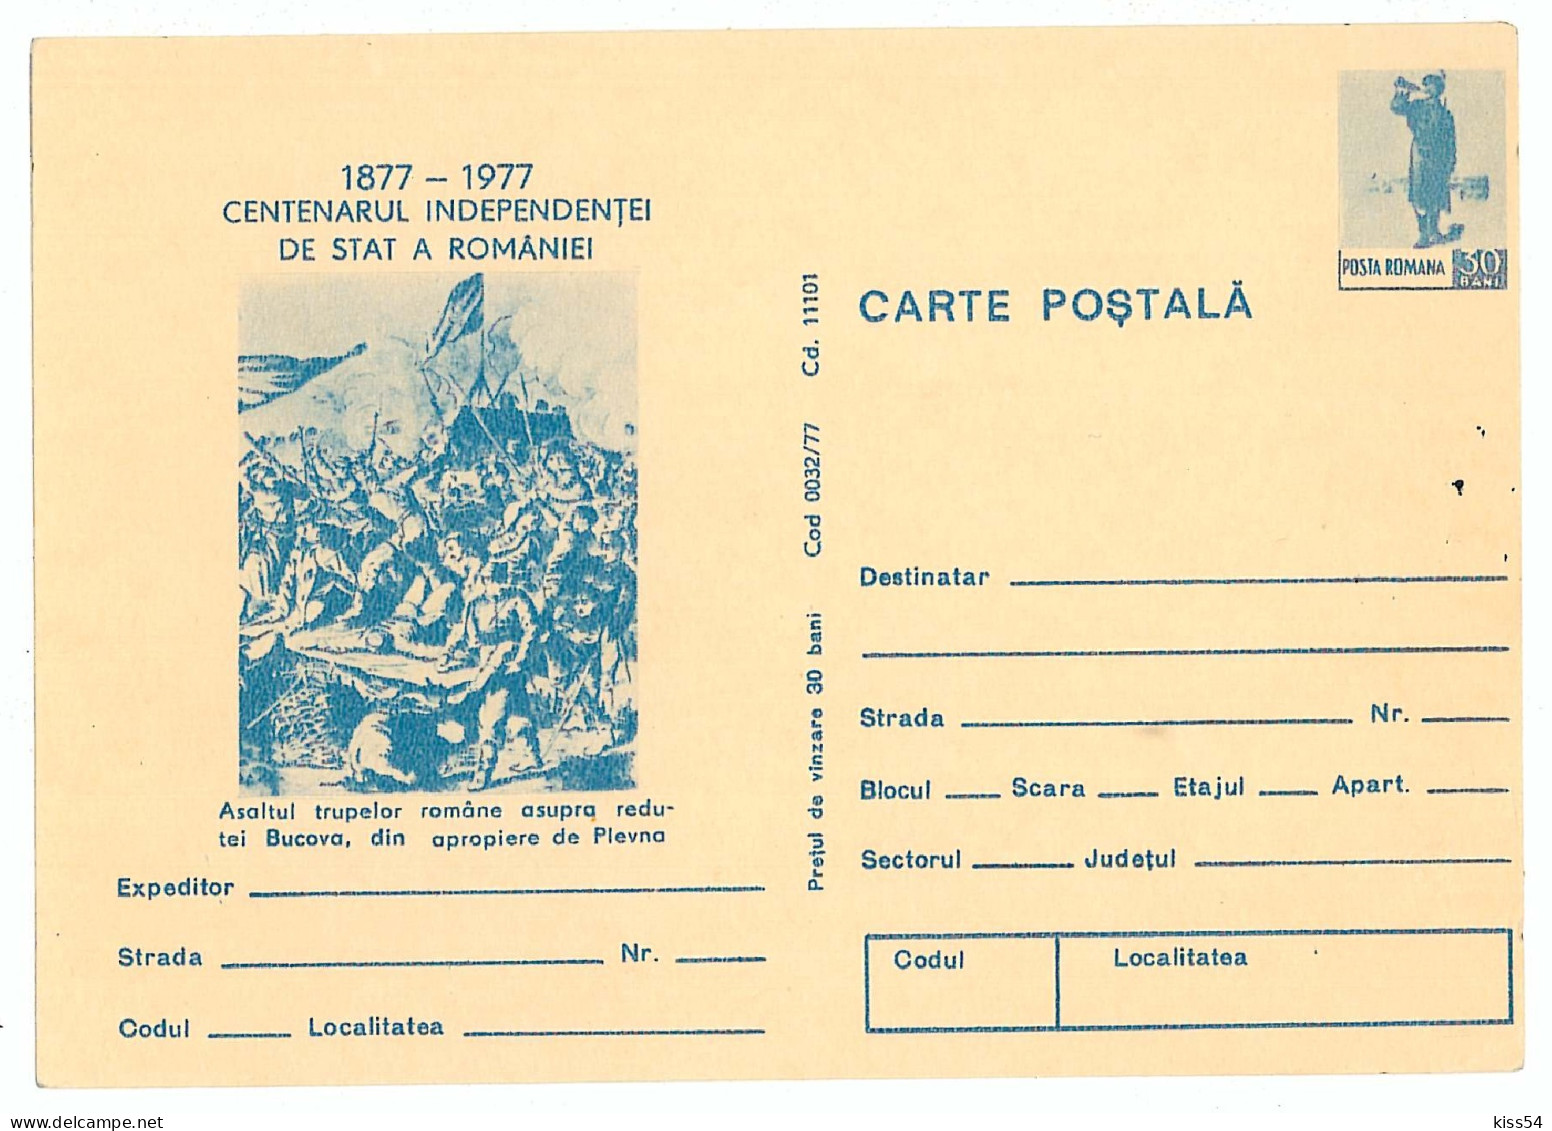 IP 77 A - 32 Centenary Independence Of Romania - Stationery - Unused - 1977 - Ganzsachen